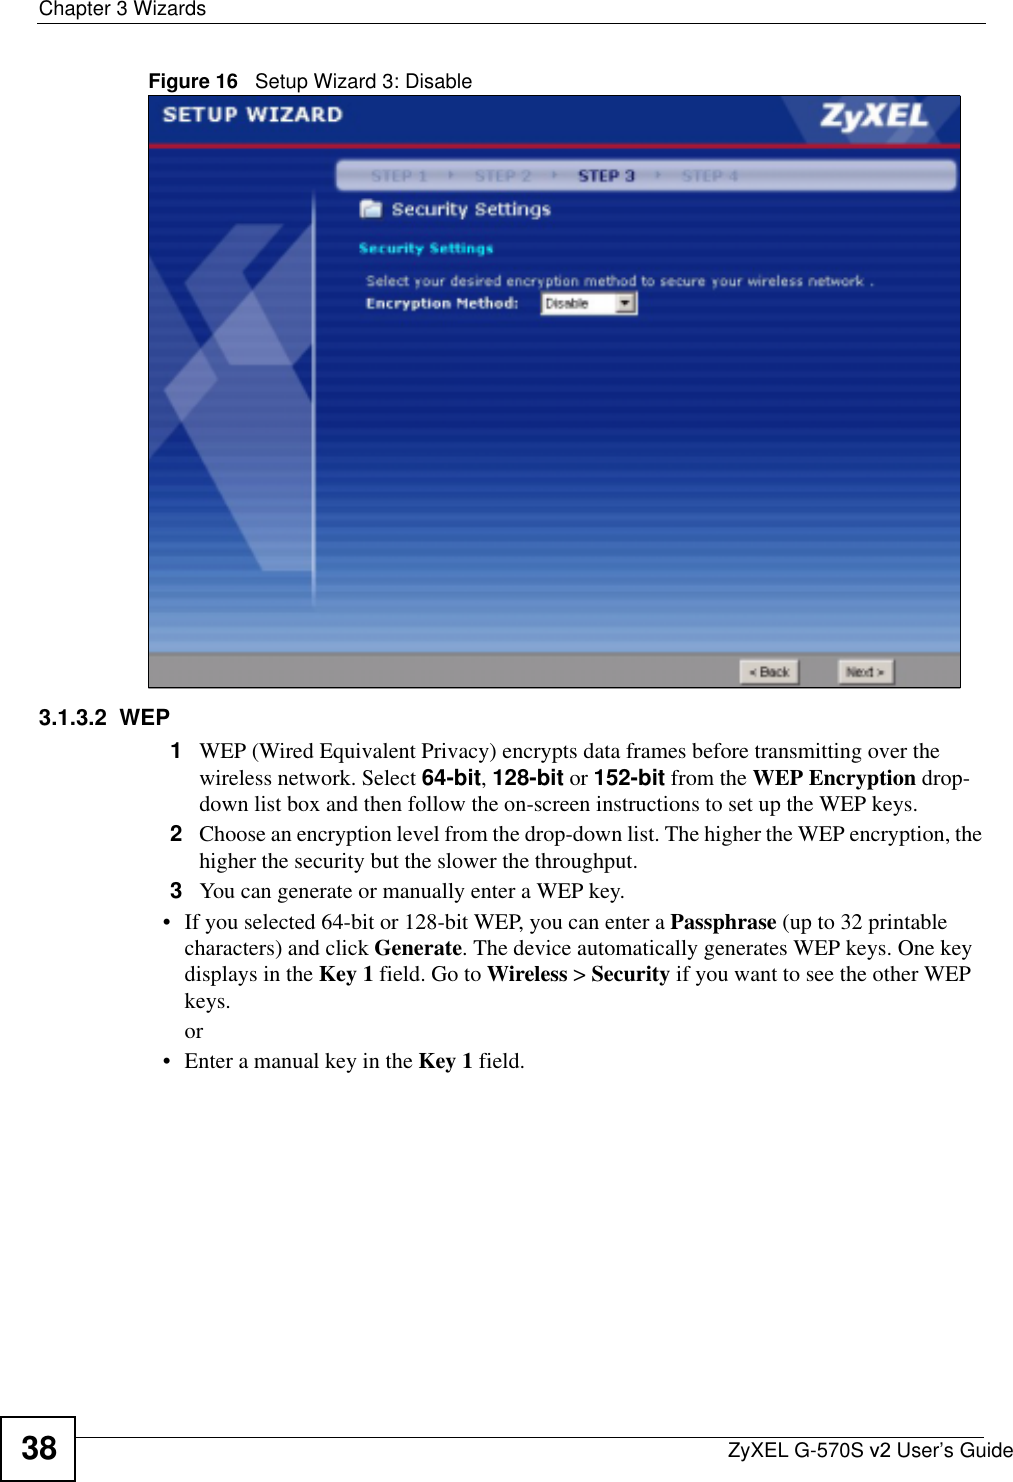 Chapter 3 WizardsZyXEL G-570S v2 User’s Guide38Figure 16   Setup Wizard 3: Disable3.1.3.2  WEP1WEP (Wired Equivalent Privacy) encrypts data frames before transmitting over the wireless network. Select 64-bit,128-bit or 152-bit from the WEP Encryption drop-down list box and then follow the on-screen instructions to set up the WEP keys. 2Choose an encryption level from the drop-down list. The higher the WEP encryption, the higher the security but the slower the throughput.3You can generate or manually enter a WEP key.• If you selected 64-bit or 128-bit WEP, you can enter a Passphrase (up to 32 printable characters) and click Generate. The device automatically generates WEP keys. One key displays in the Key 1 field. Go to Wireless &gt; Security if you want to see the other WEP keys.or• Enter a manual key in the Key 1 field.